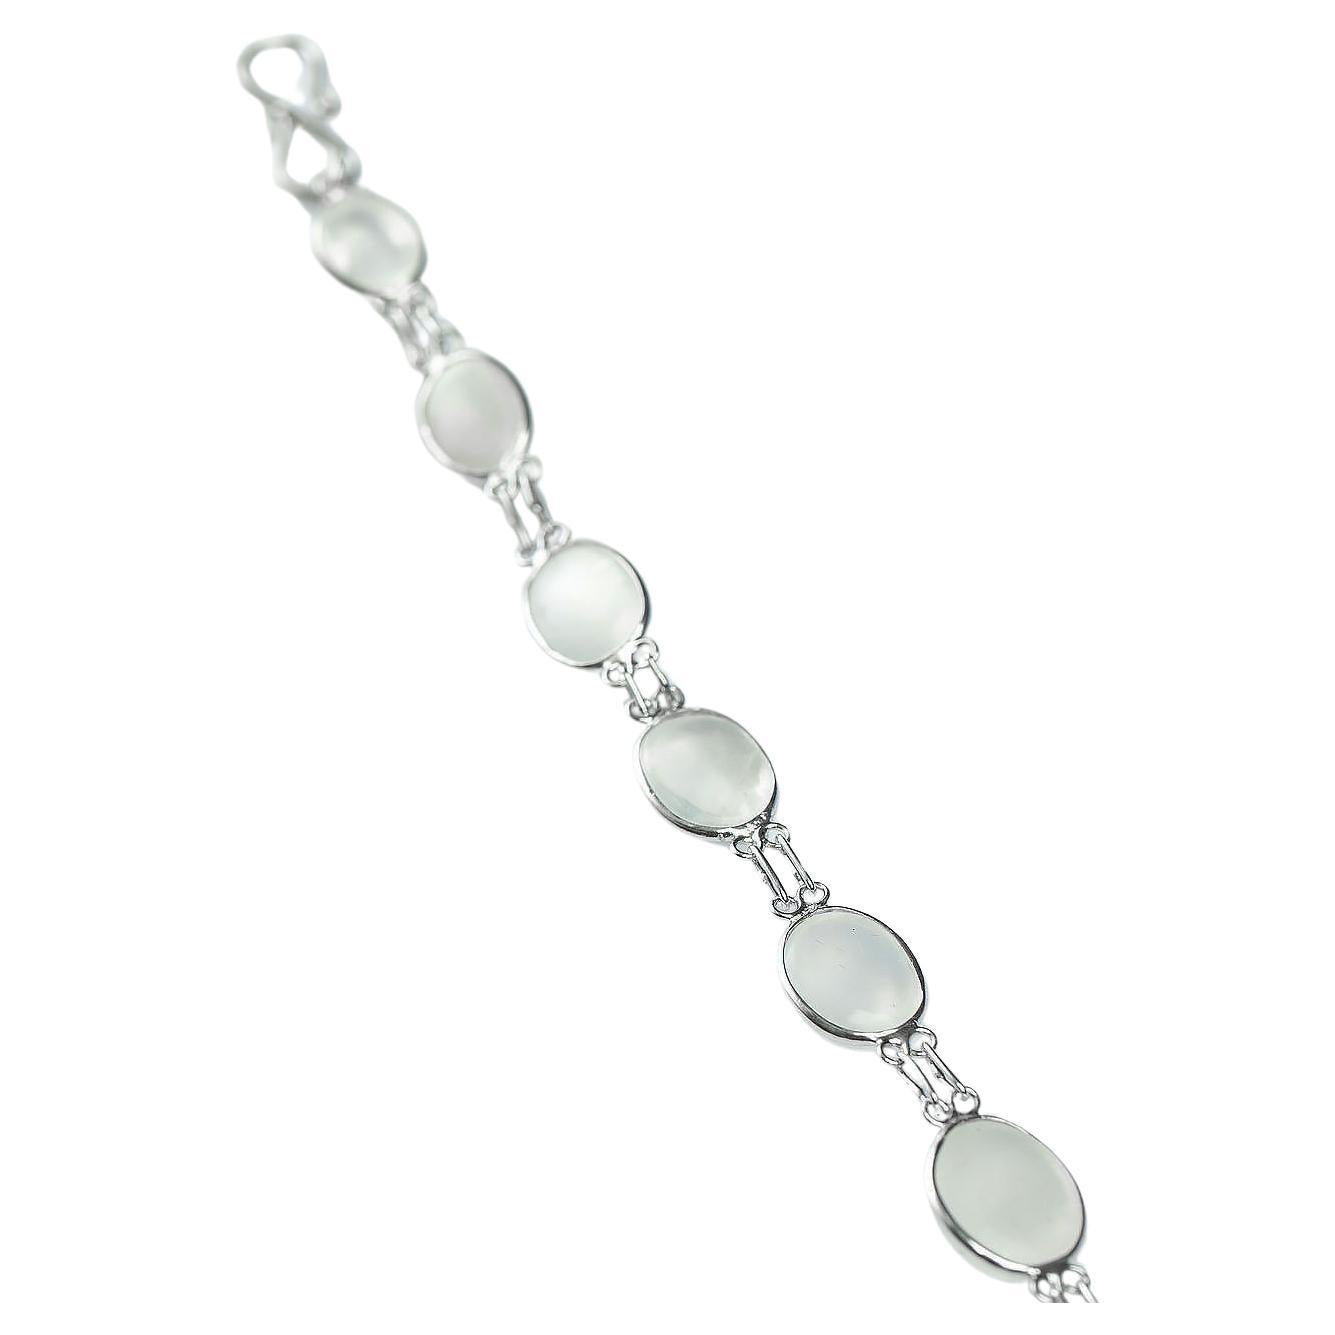 13ctw Cabochon Natural Moonstone Gemstone Tennis Link Bracelet In New Condition For Sale In Sheridan, WY